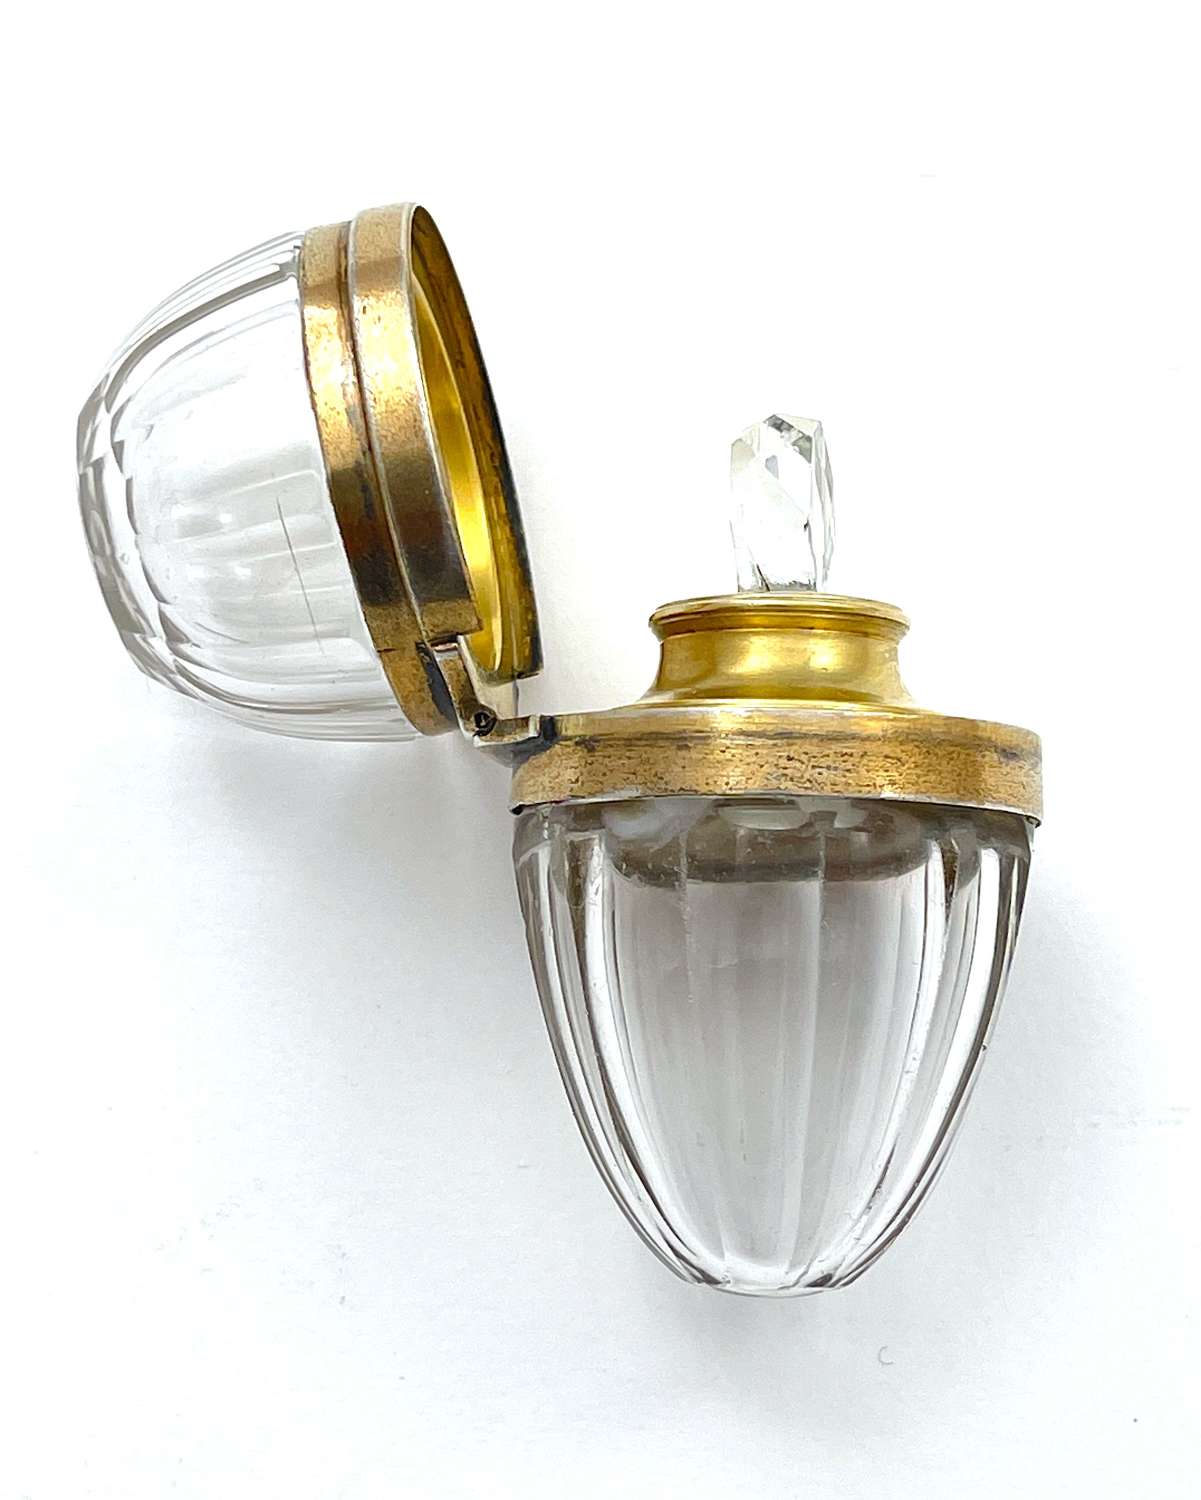 Antique French Cut Glass Egg Shaped Perfume Bottle